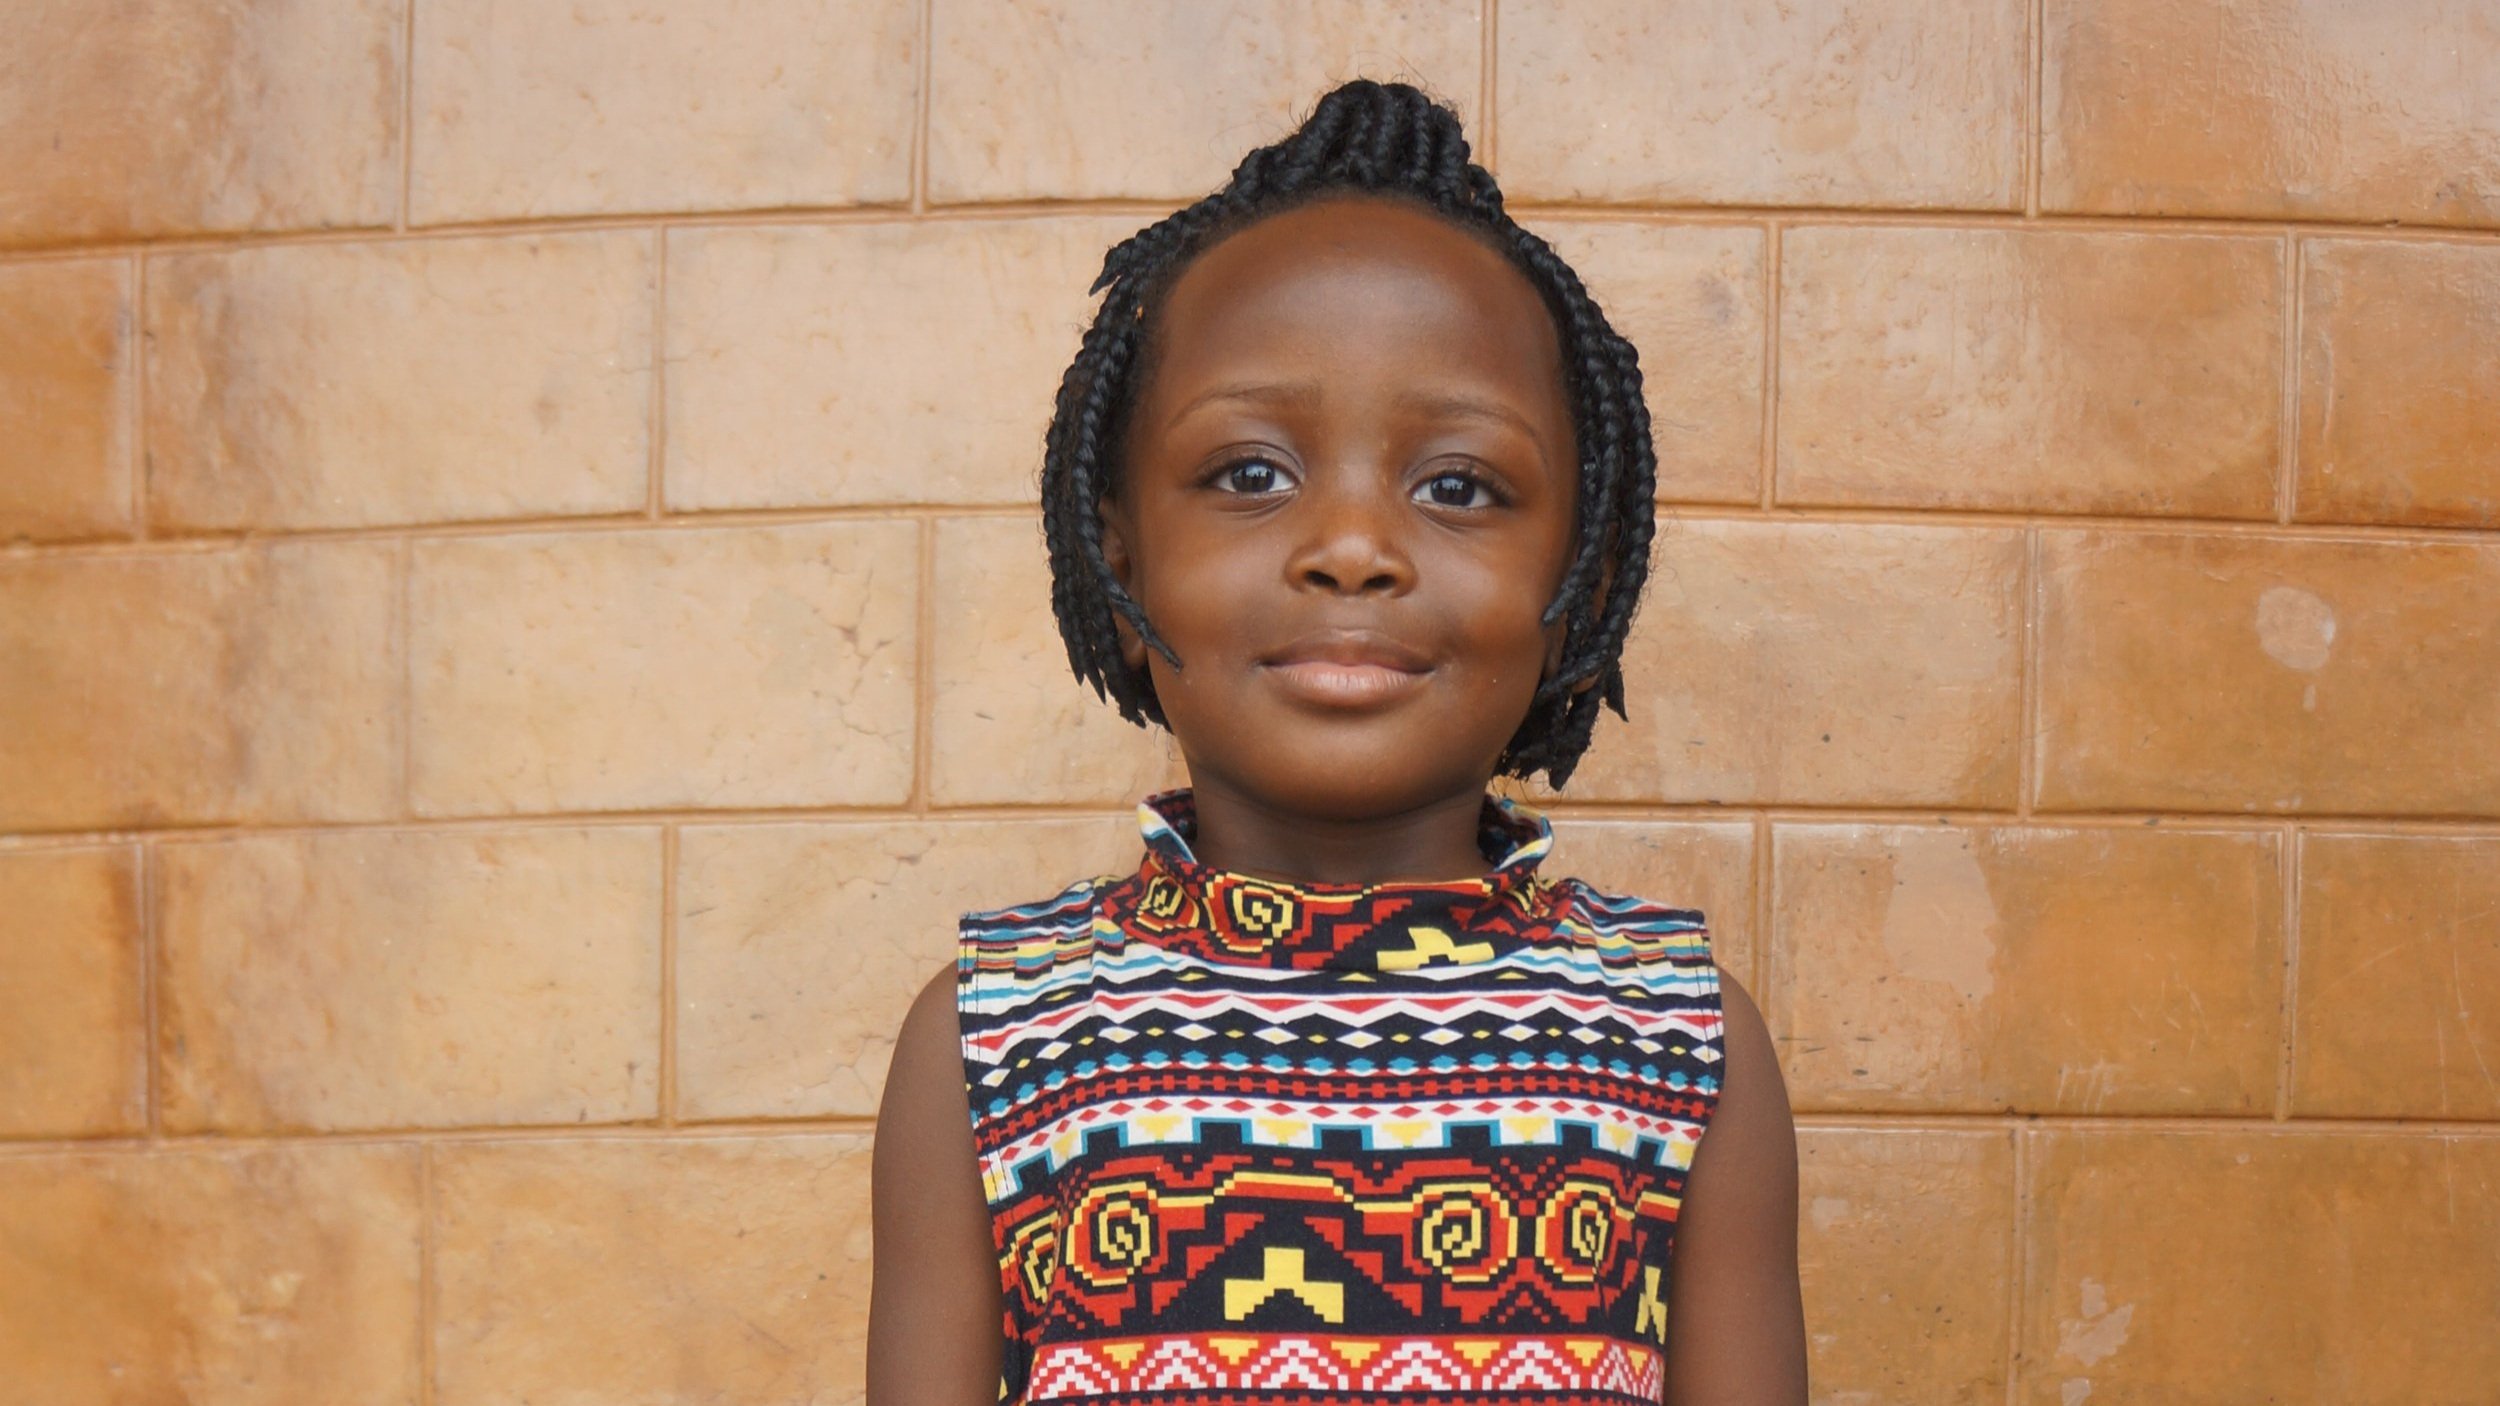   MORE THAN  A SCHOLARSHIP…   It’s a Way Out of Poverty. Our Scholarship Program offers children living in Uganda a grassroots education where they can build better futures.   CLICK HERE TO FUND A SCHOLARSHIP  